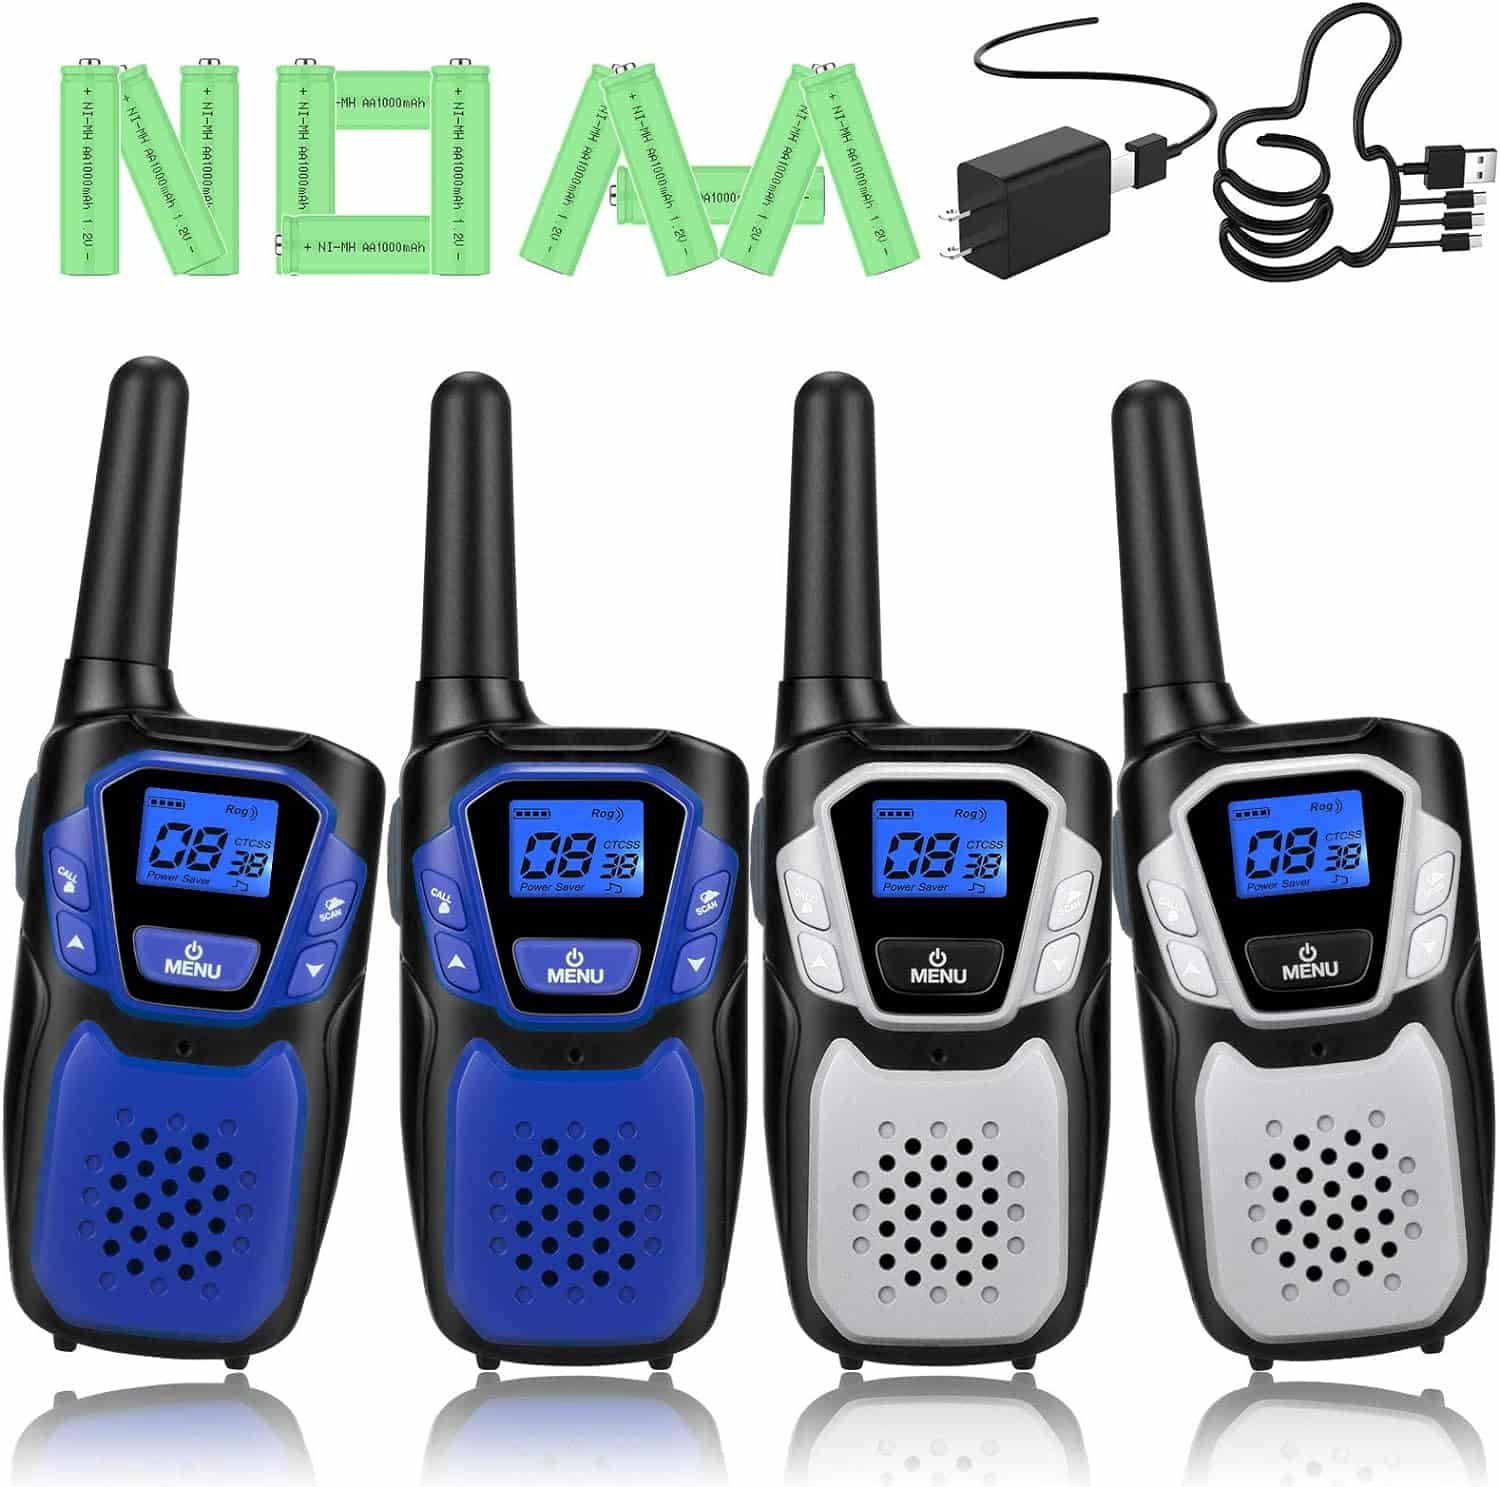 Roundup of Top Walkie-Talkies for Outdoor Communication